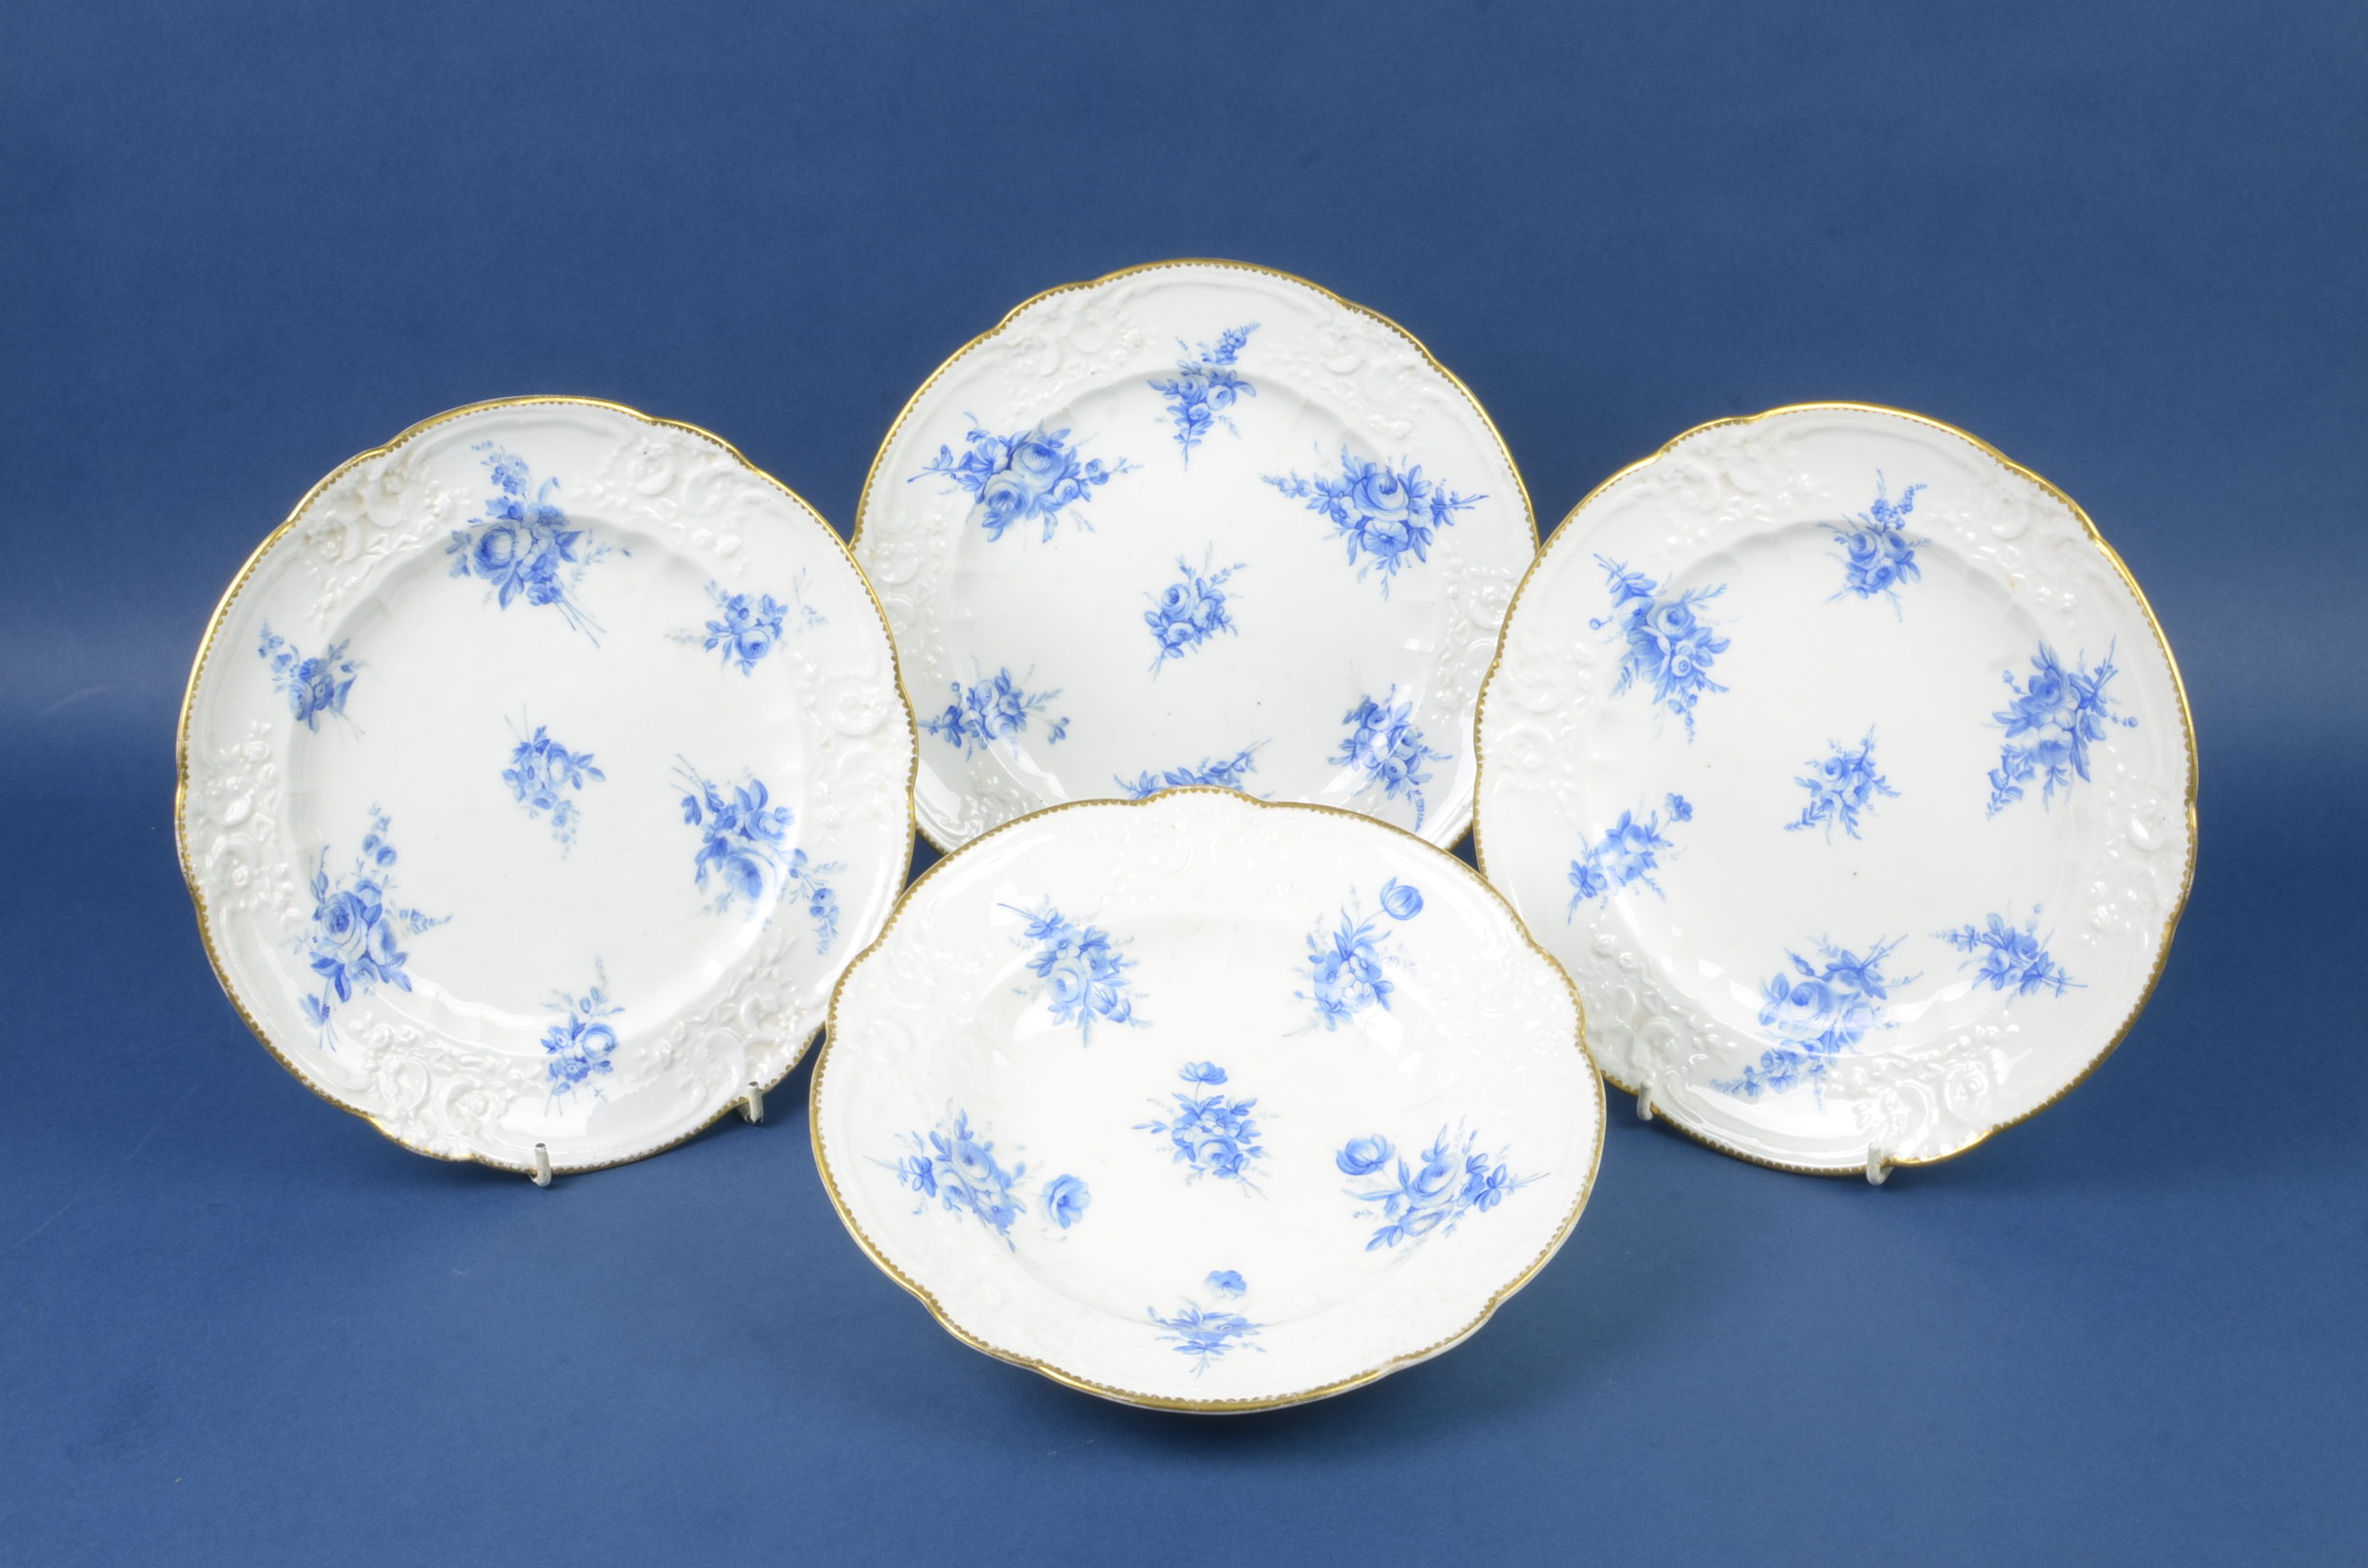 Four Nantgarw porcelain Plates, circa 1818-1820, comprising three dinner plates and a soup plate,